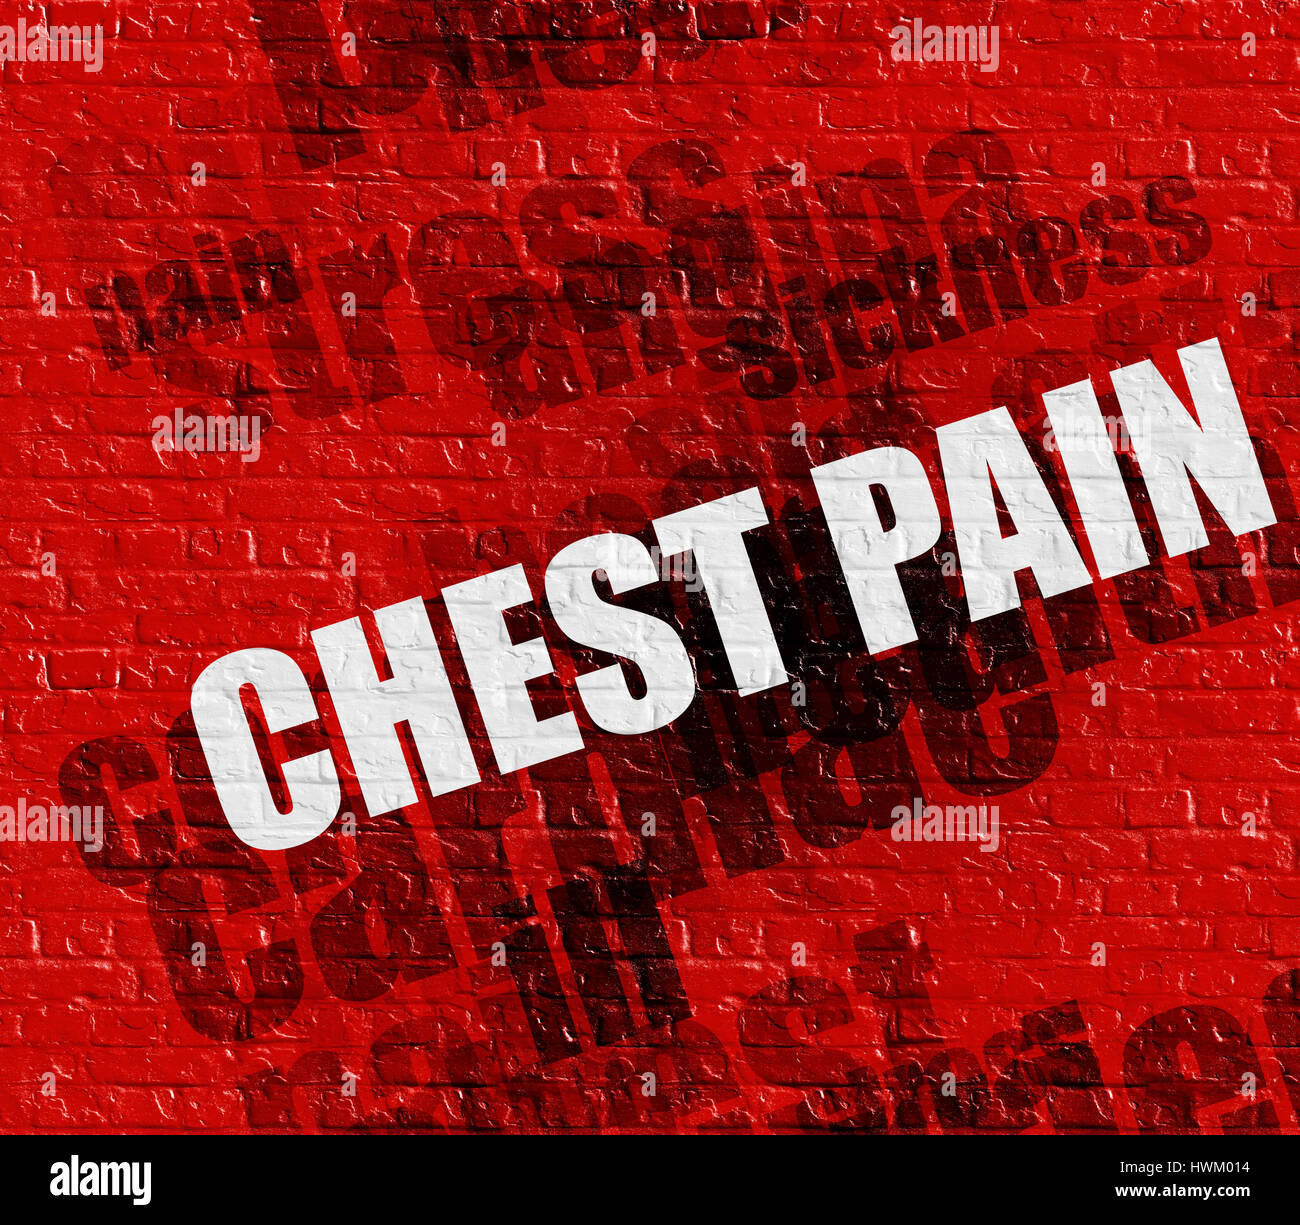 Modern medical concept: Chest Pain on Red Brickwall. Stock Photo